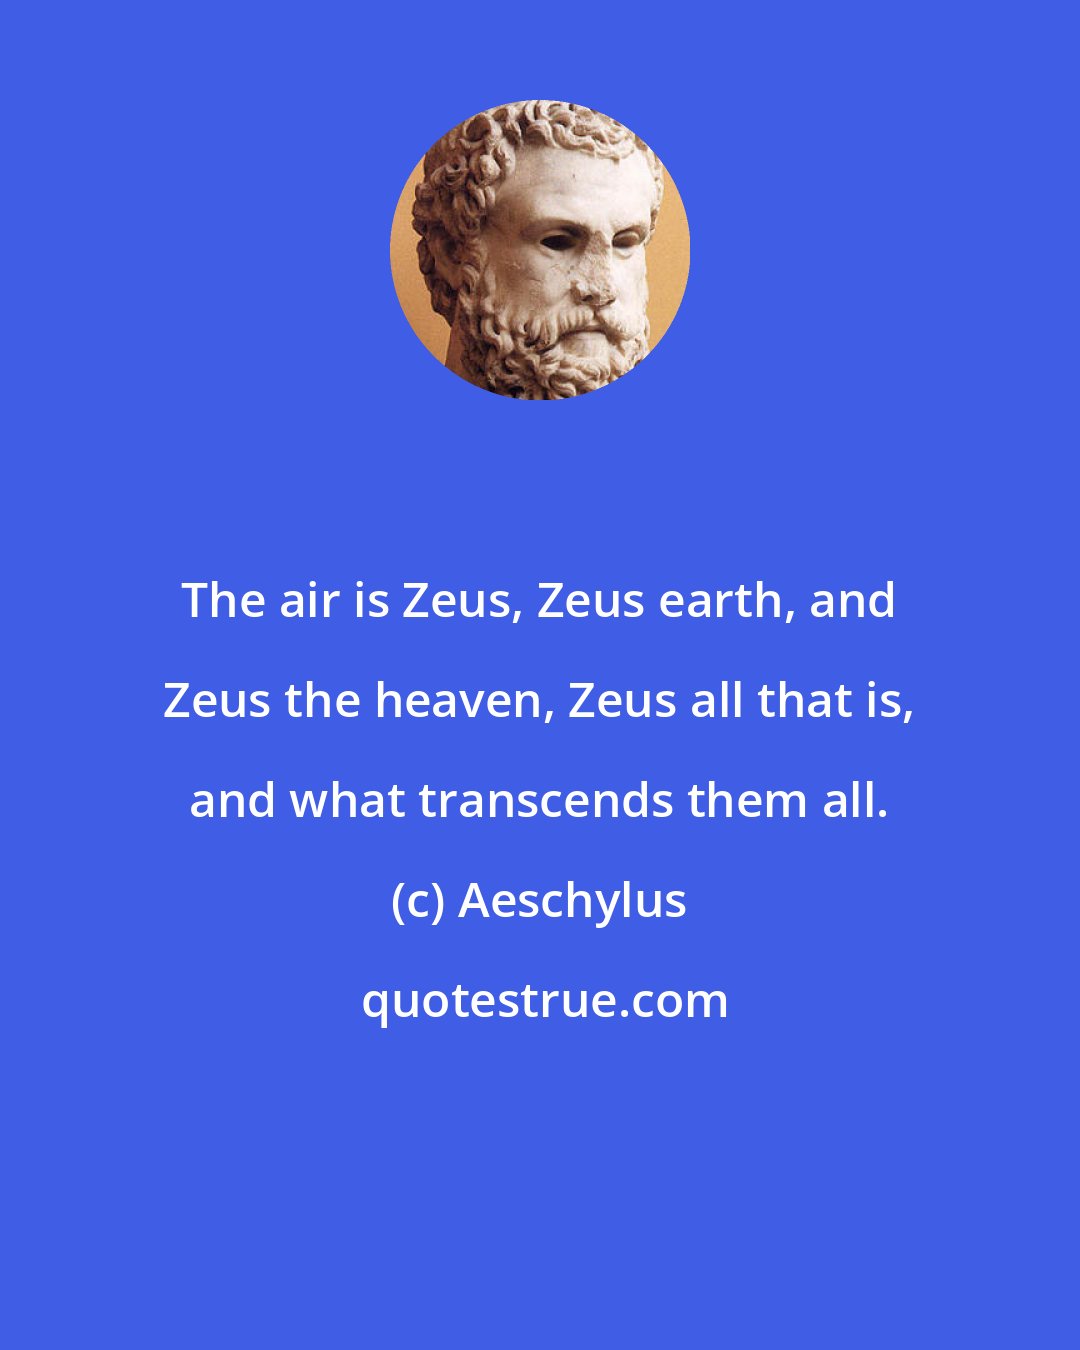 Aeschylus: The air is Zeus, Zeus earth, and Zeus the heaven, Zeus all that is, and what transcends them all.